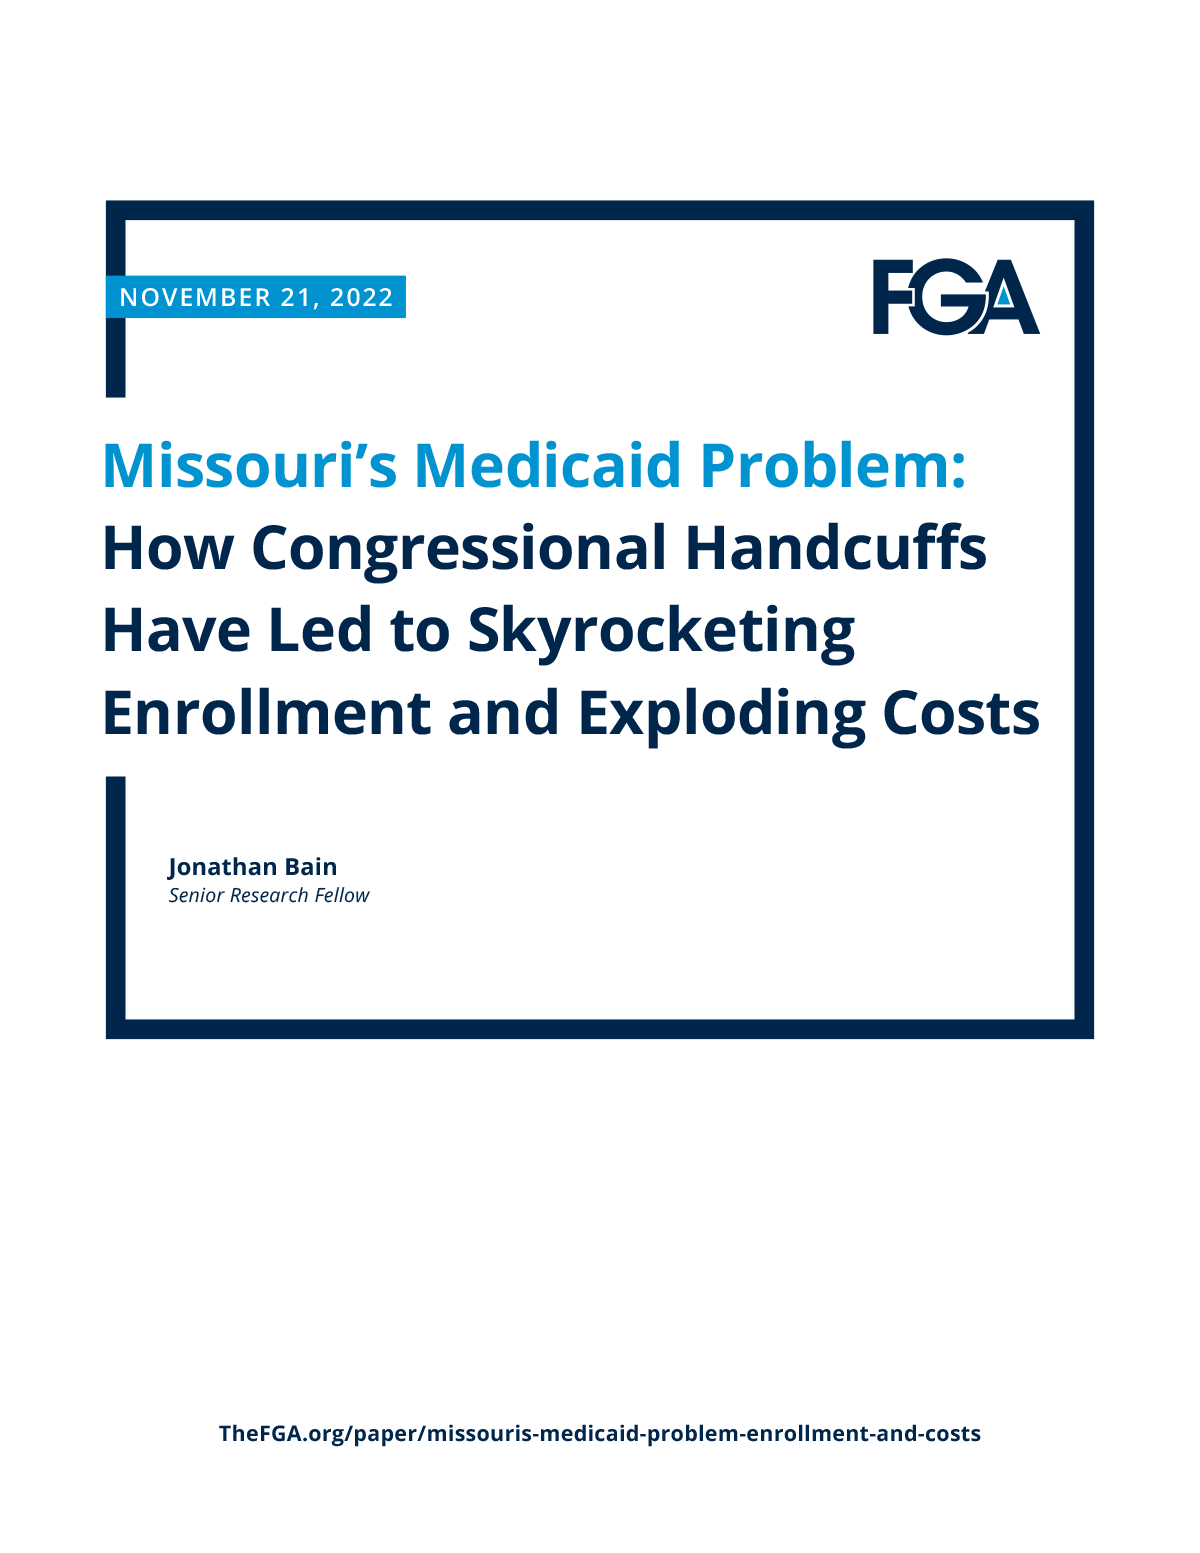 Missouri’s Medicaid Problem: How Congressional Handcuffs Have Led to Skyrocketing Enrollment and Exploding Costs